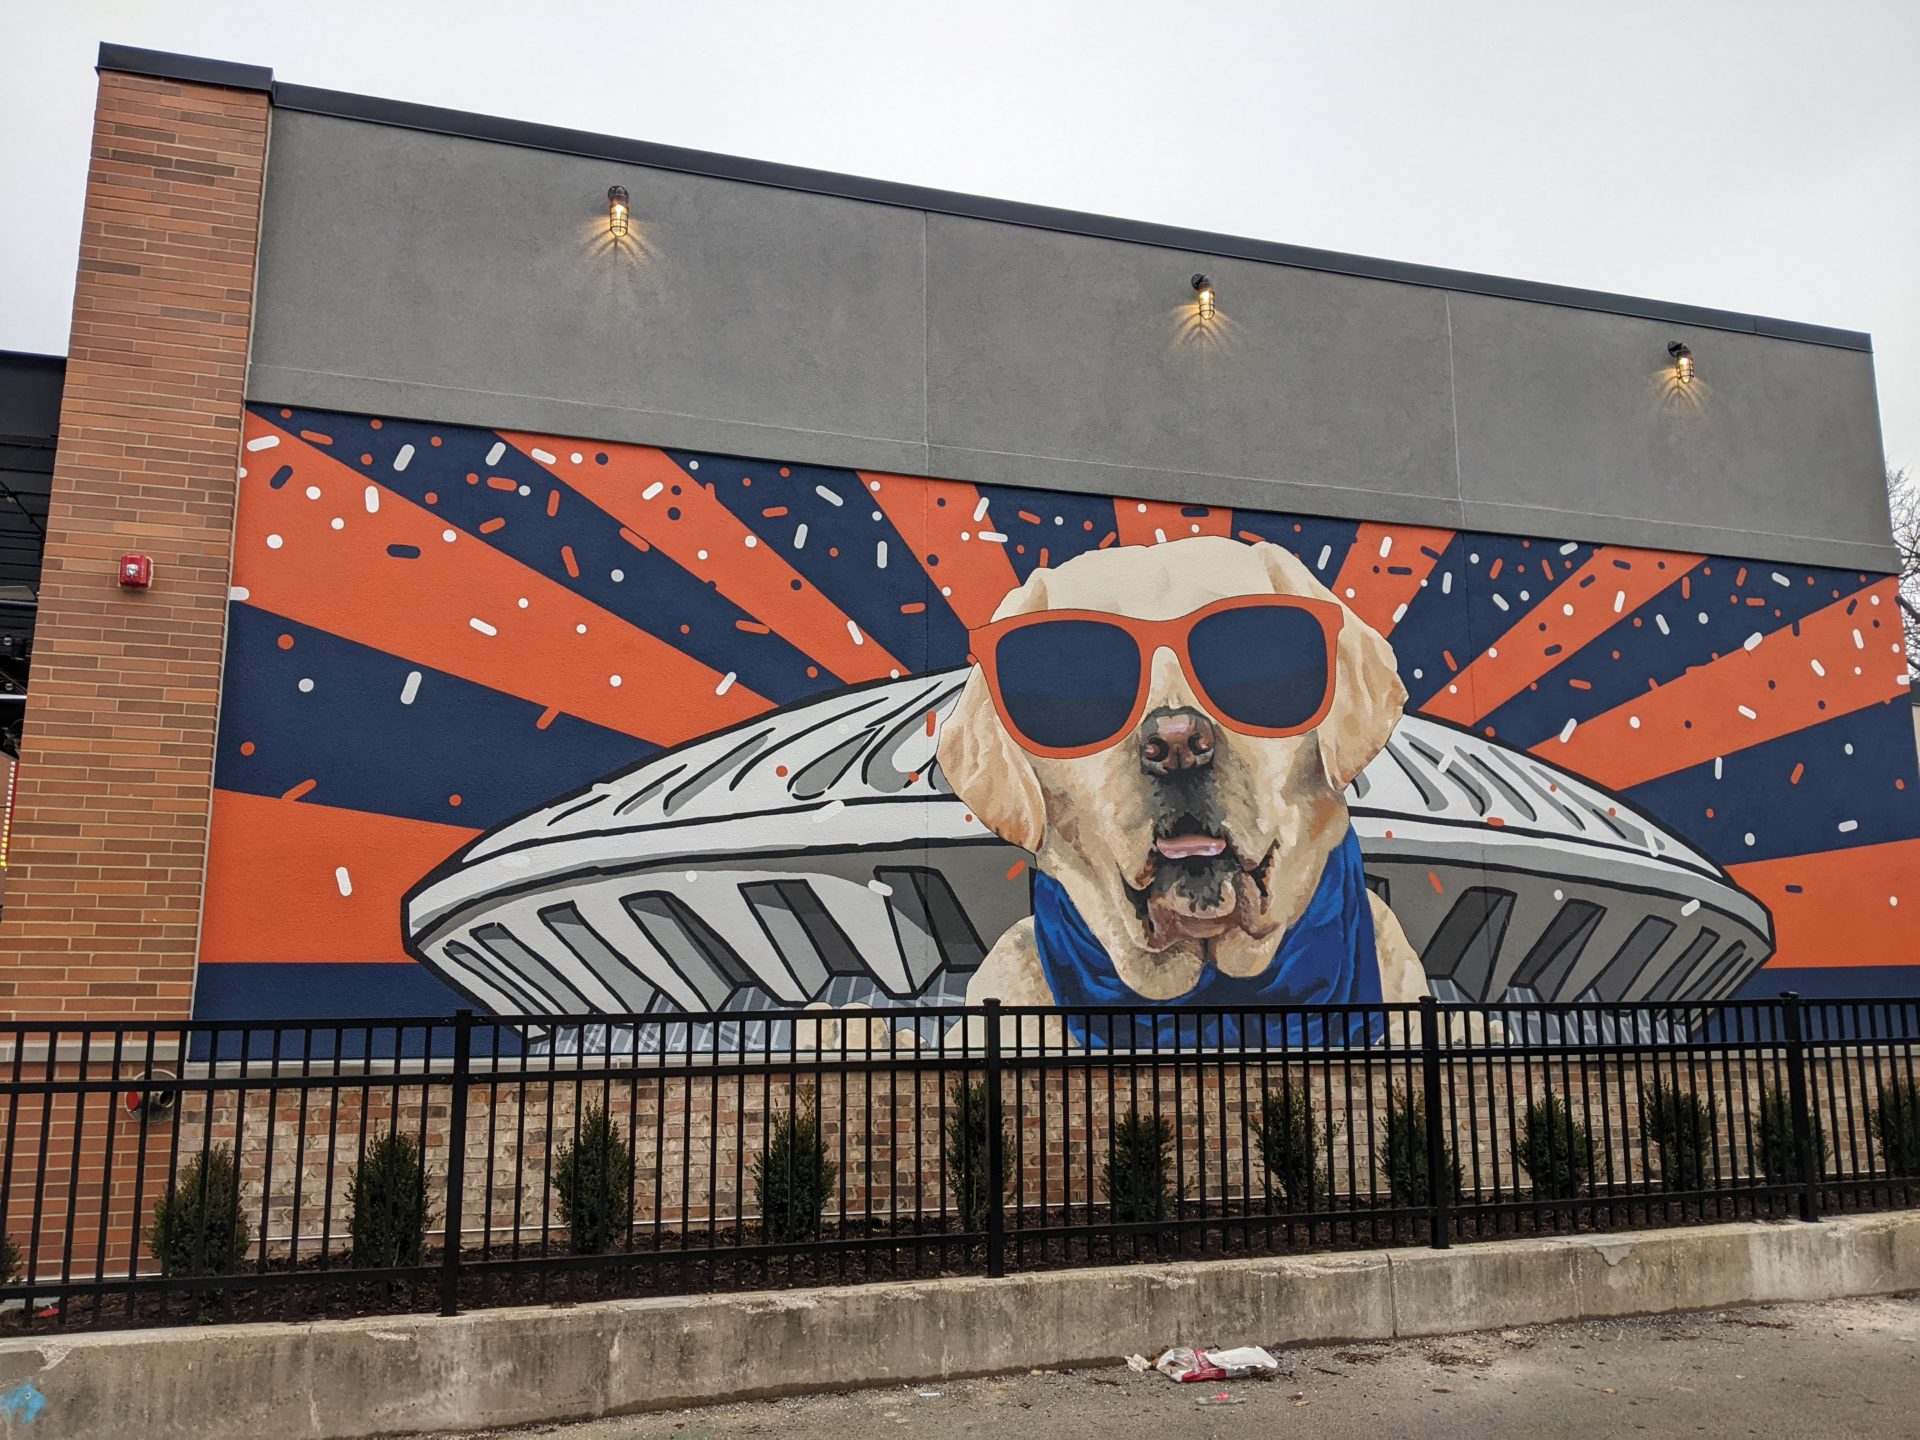 A large mural covers the side of a building. The mural depicts the State Farm Center, with a golden Labrador in orange sunglasses and a blue scarf in front of it. The background is dark blue and orange stripes with blue, orange, and white confetti.